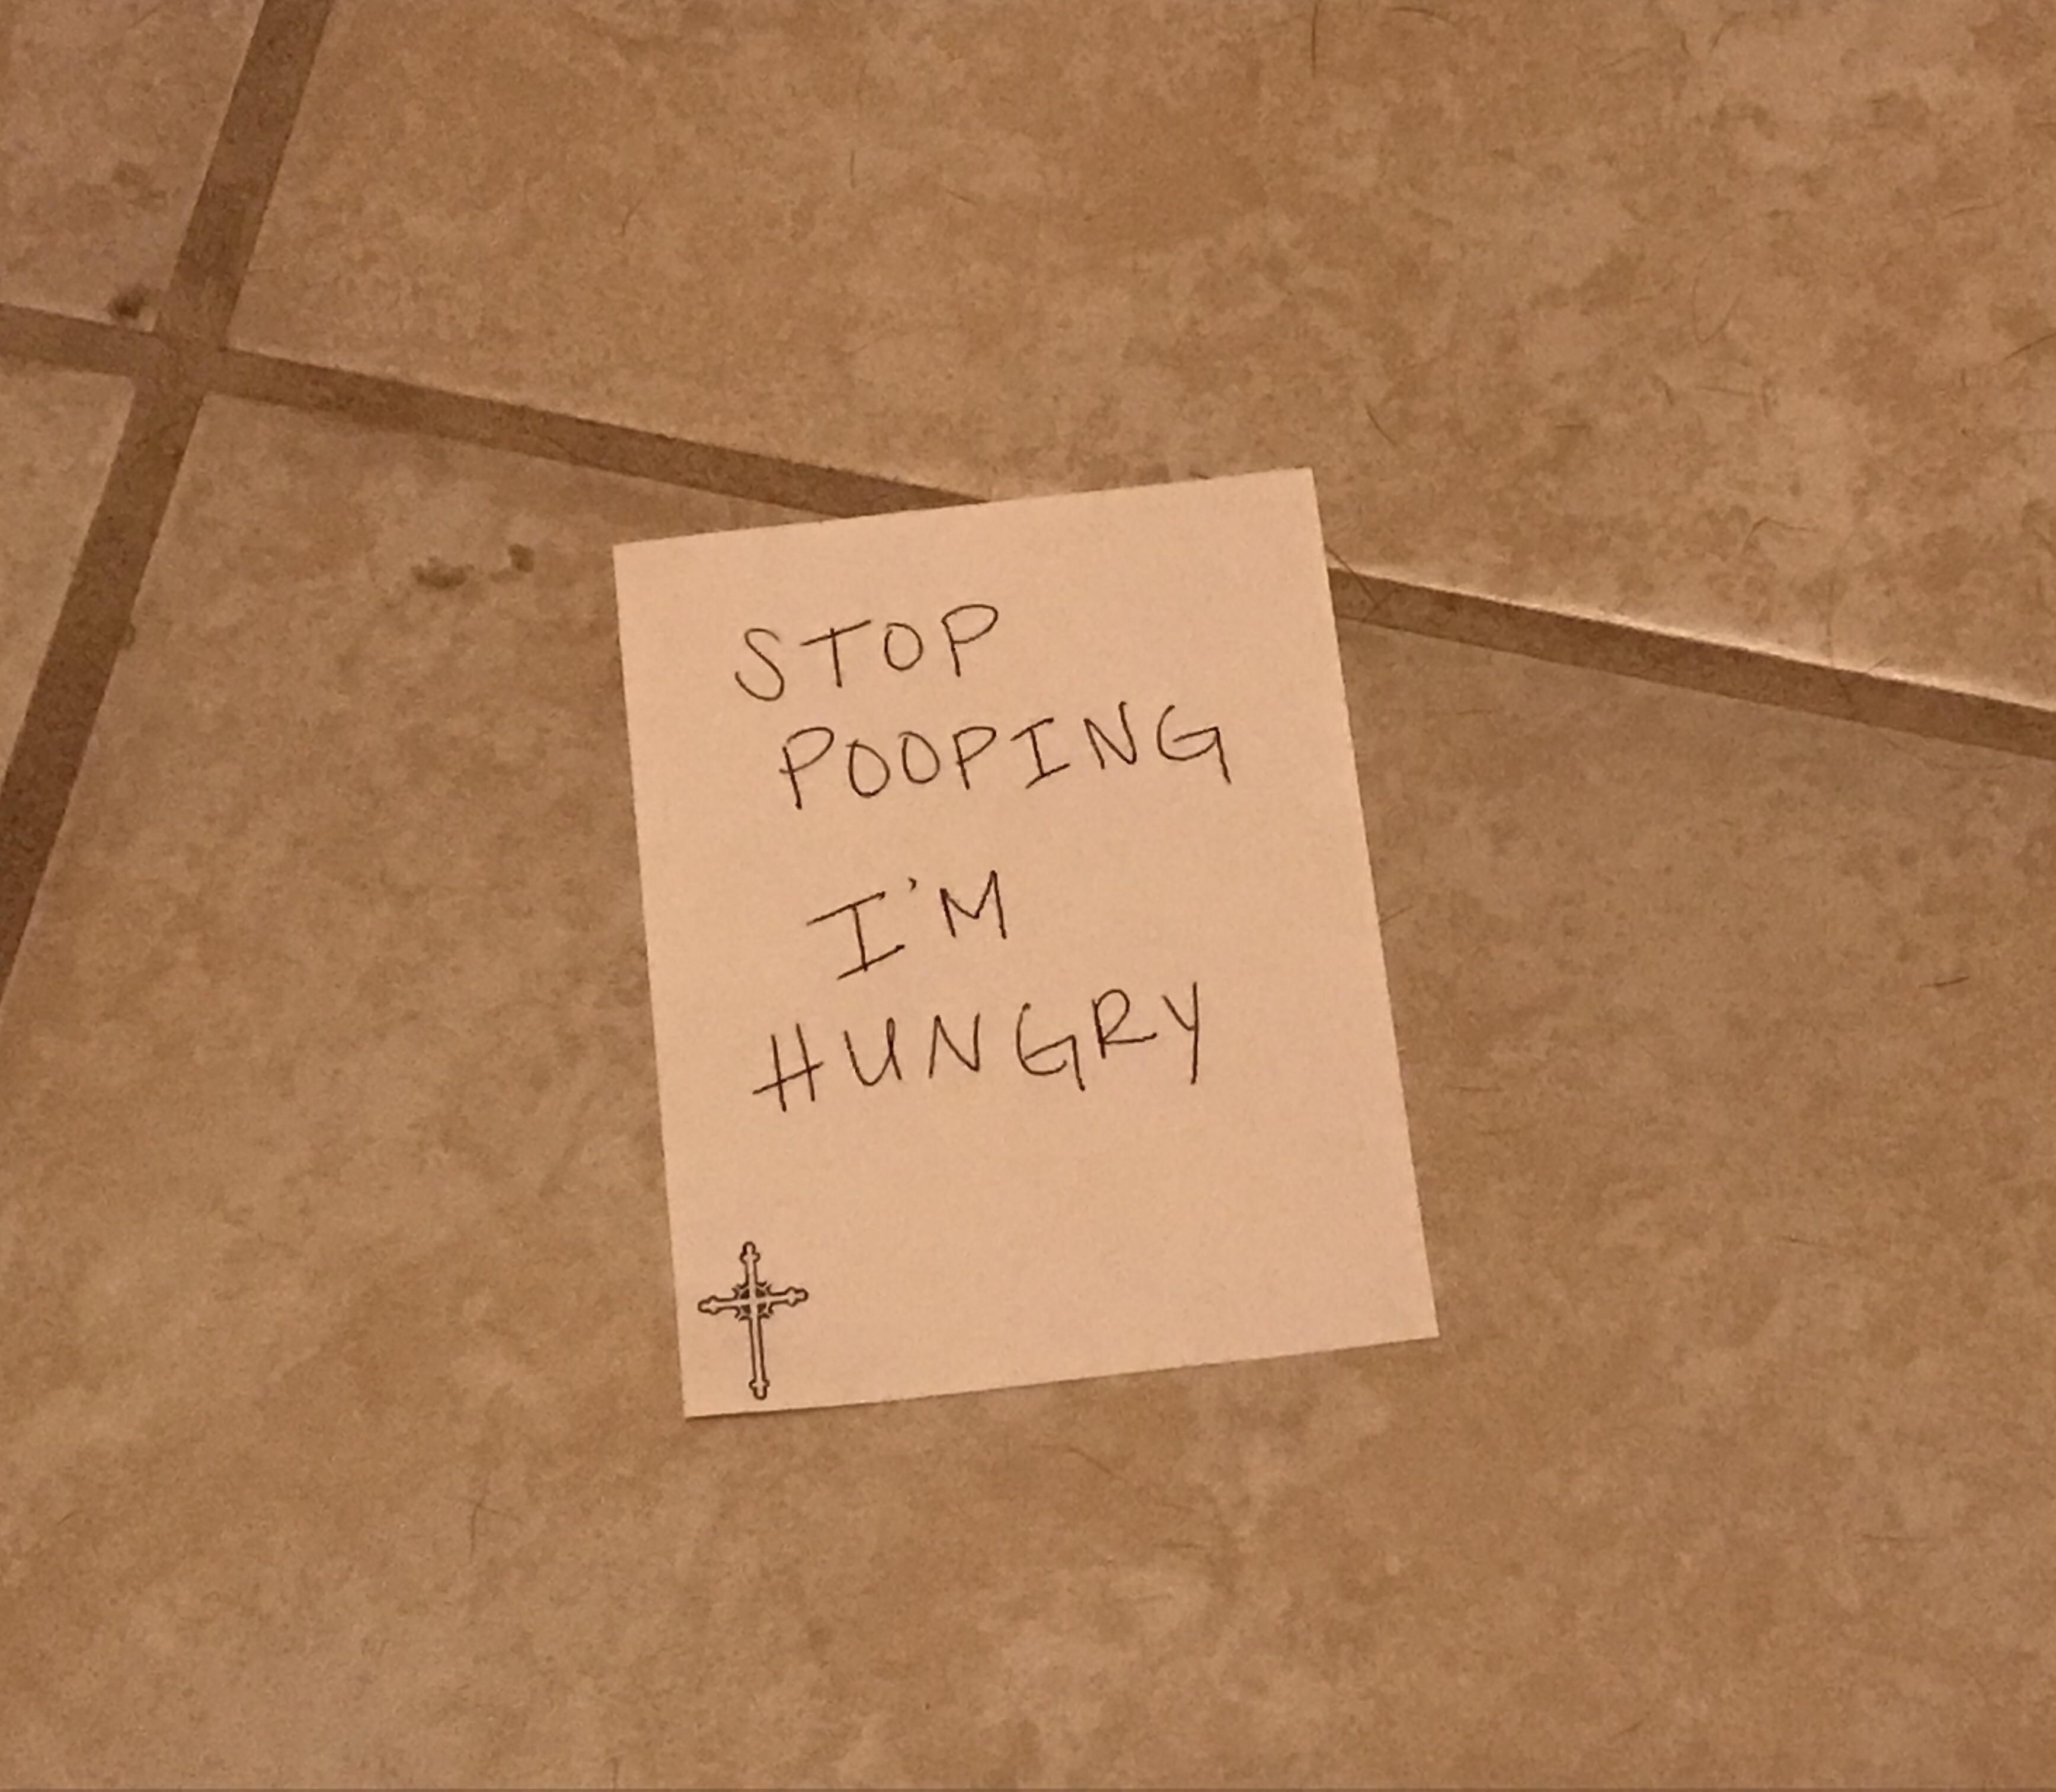 My wife just slid this under the bathroom door. Apparently I’m taking too long.